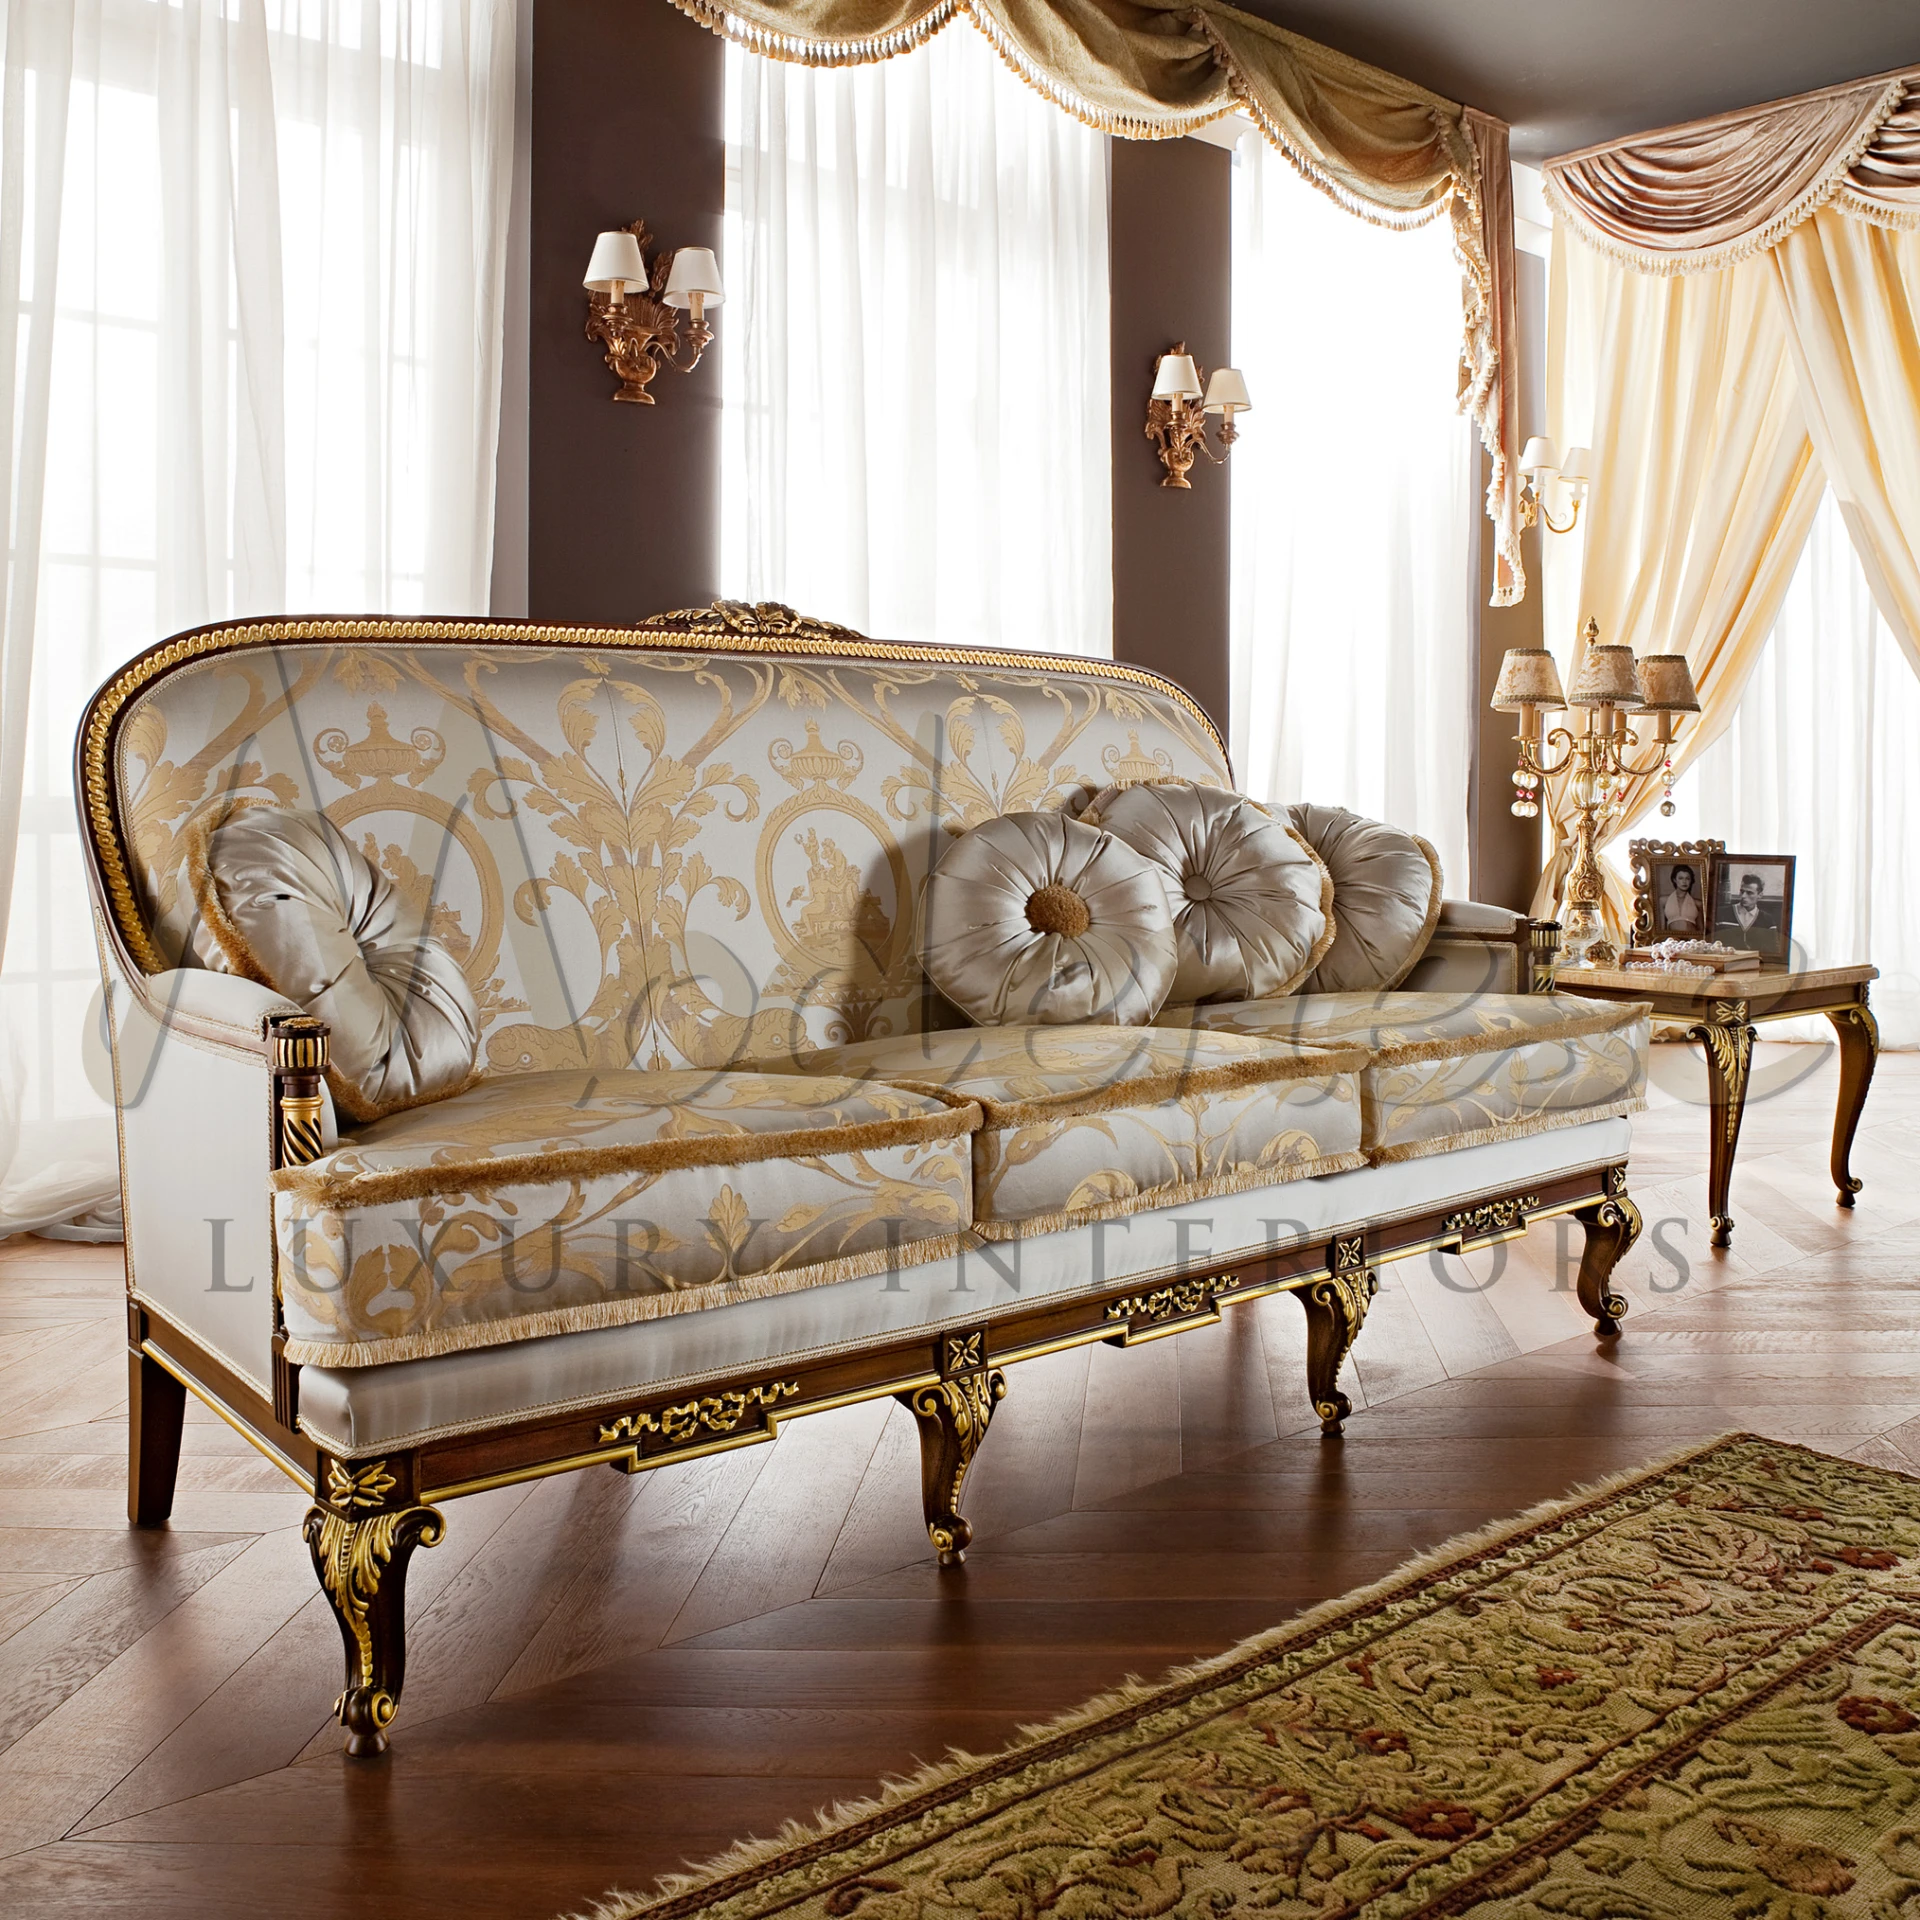 Durable Classic Style Sofa with solid wood structure and gold leaf details, showcasing refined Italian design and craftsmanship.
